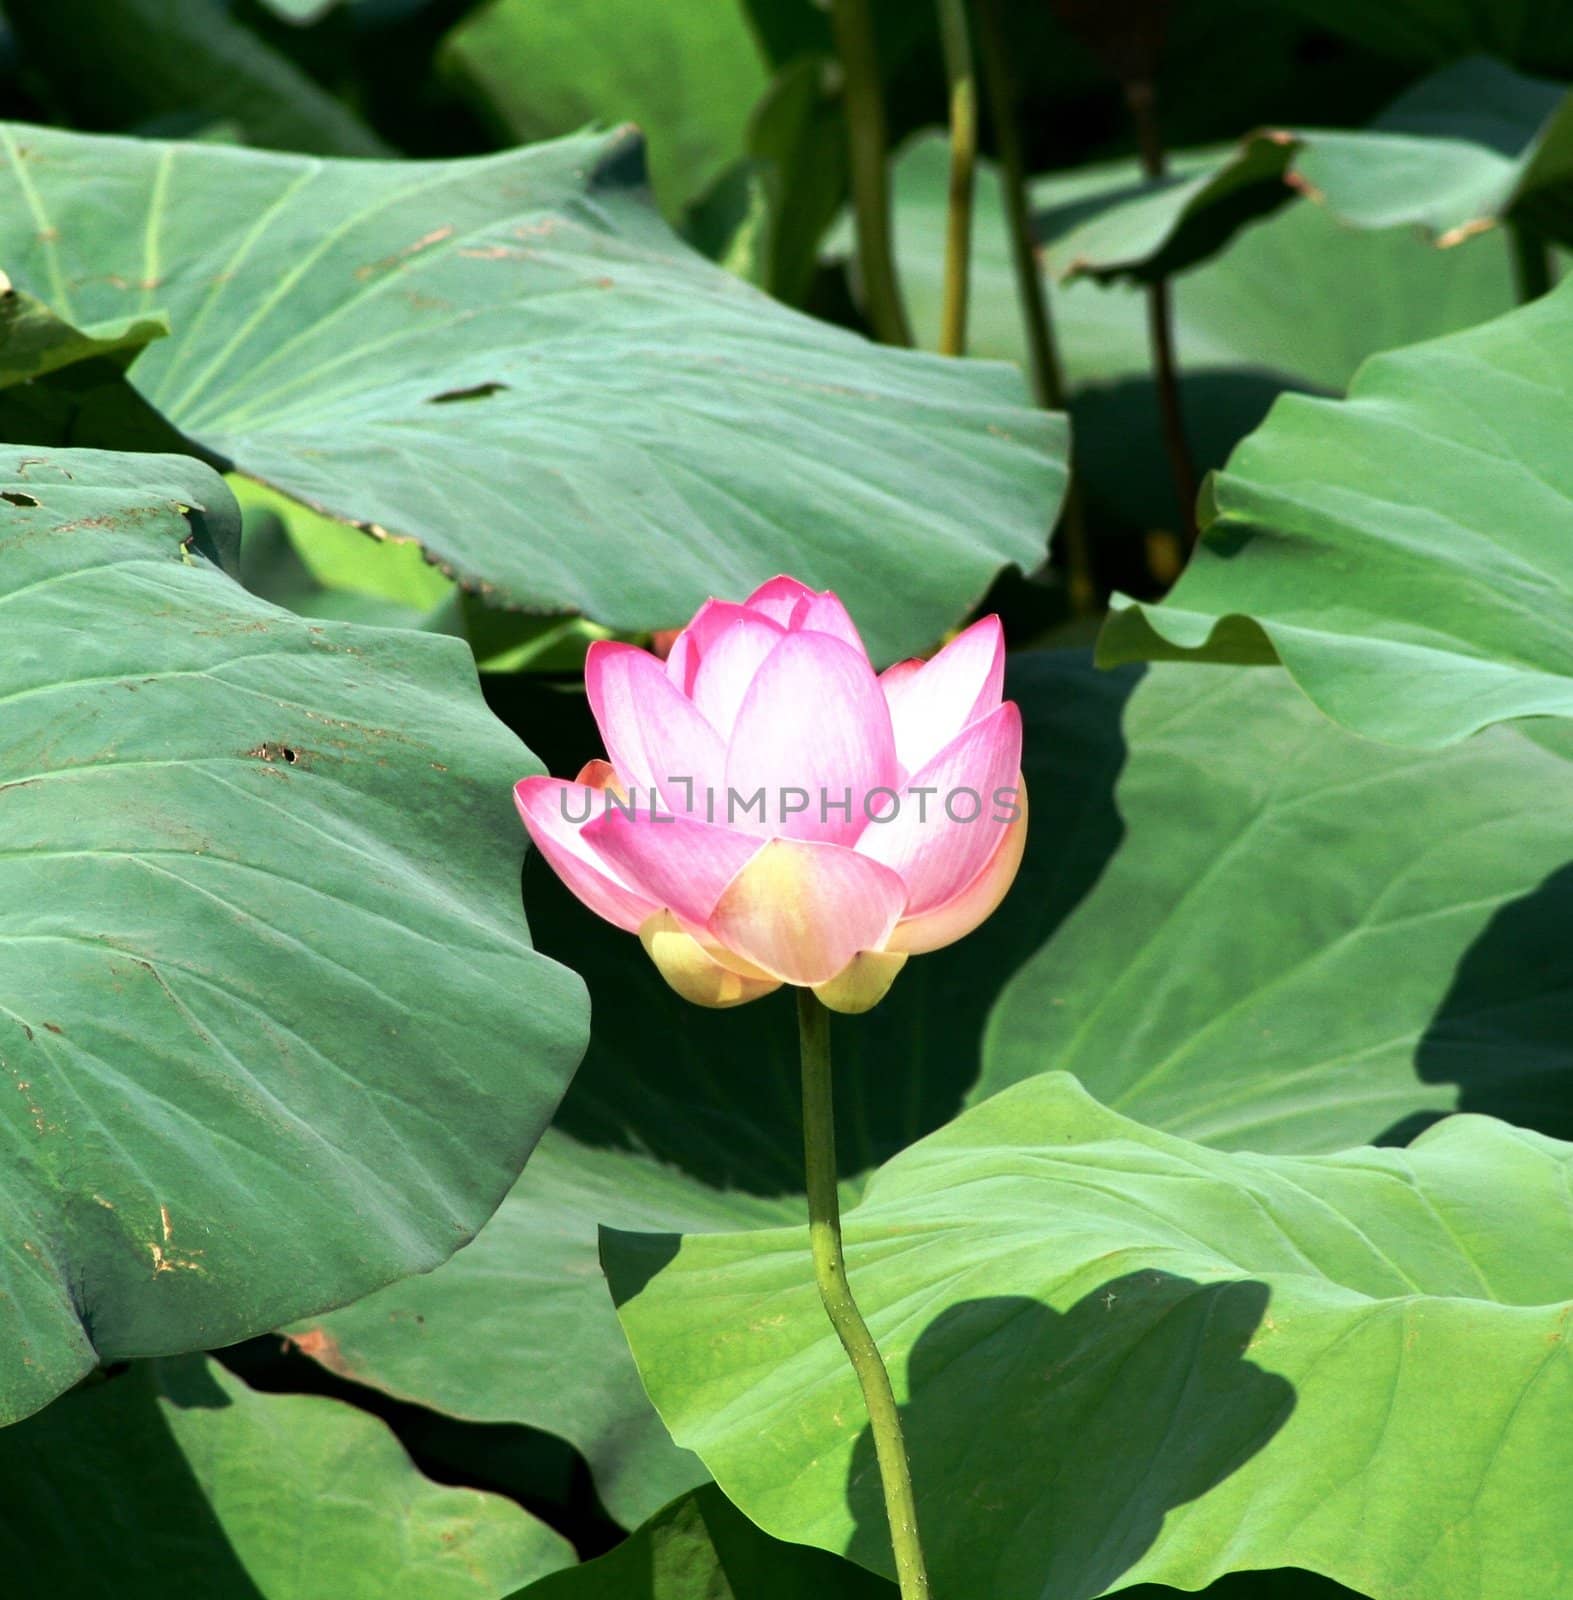 Lotus flower and green leaves